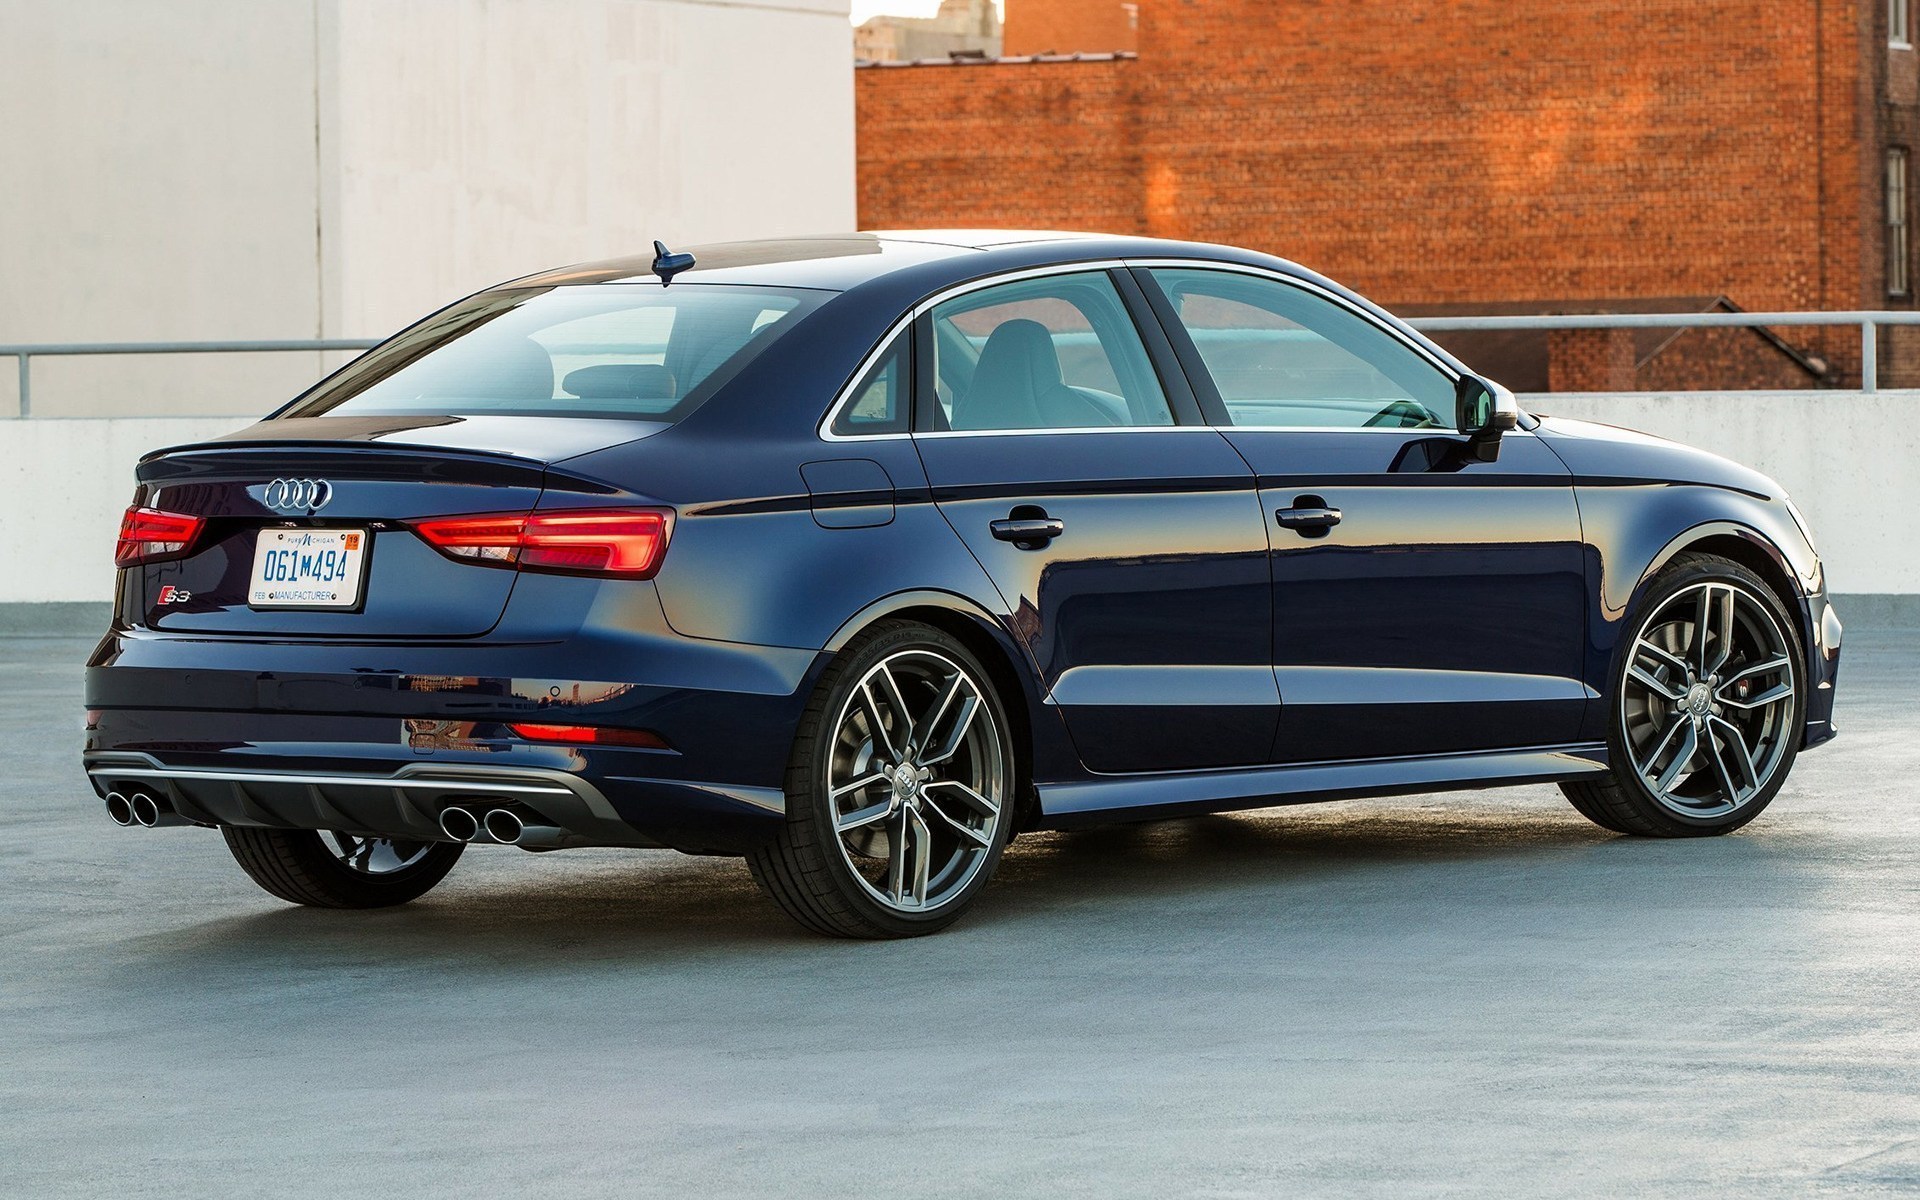 Audi S3 Wallpaper 24 Images On Genchi Info A3 Sedan Wallpapers Hd 1920x1200